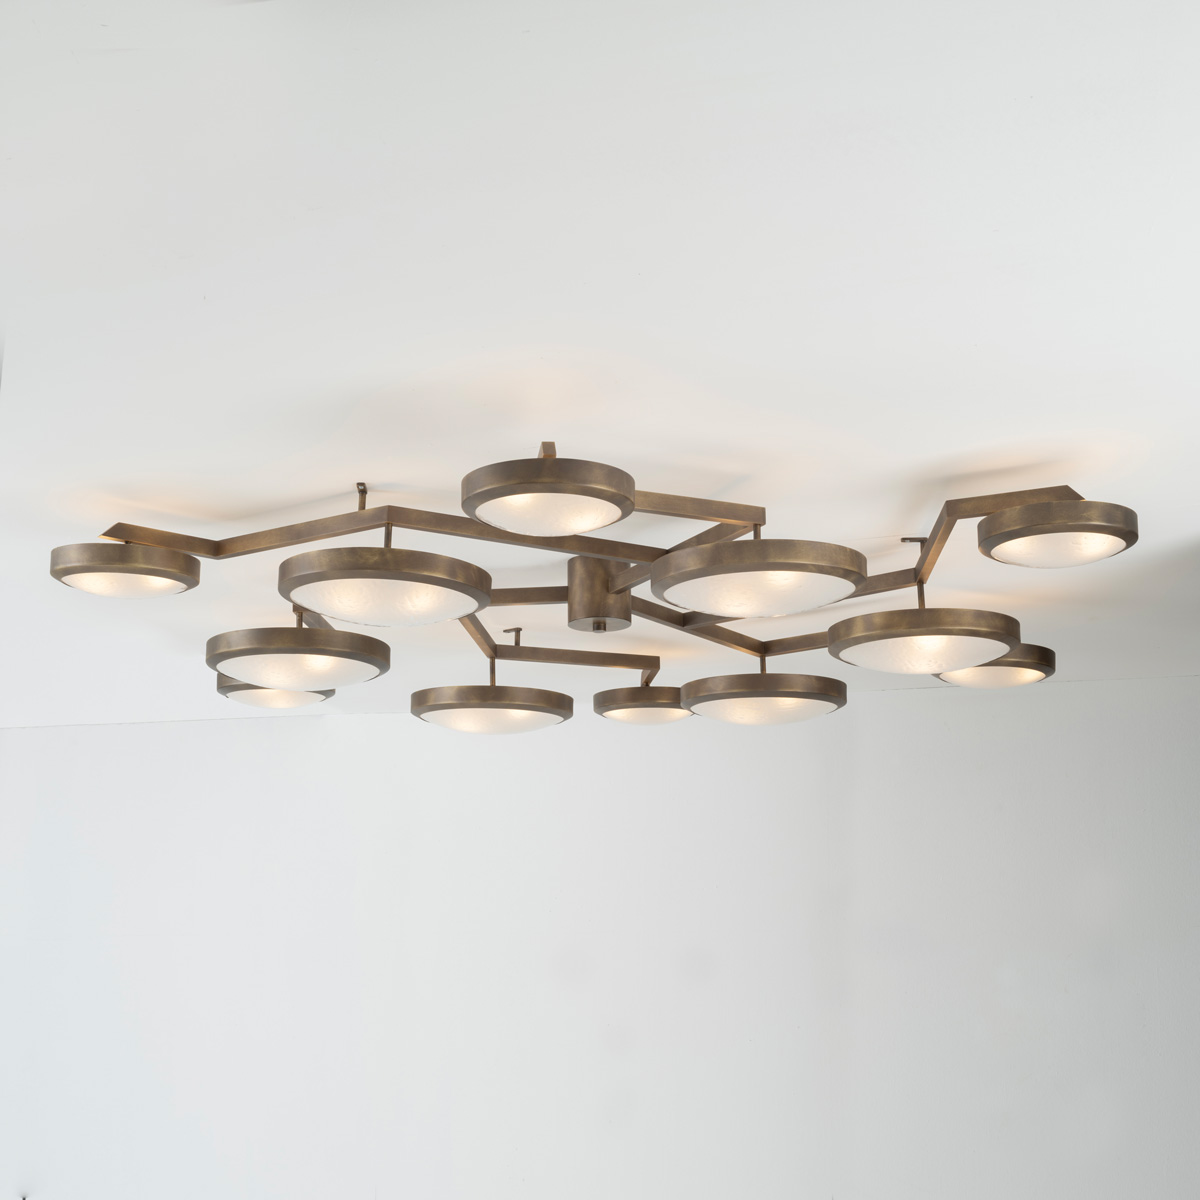 Nuvola ceiling light by gaspare asaro